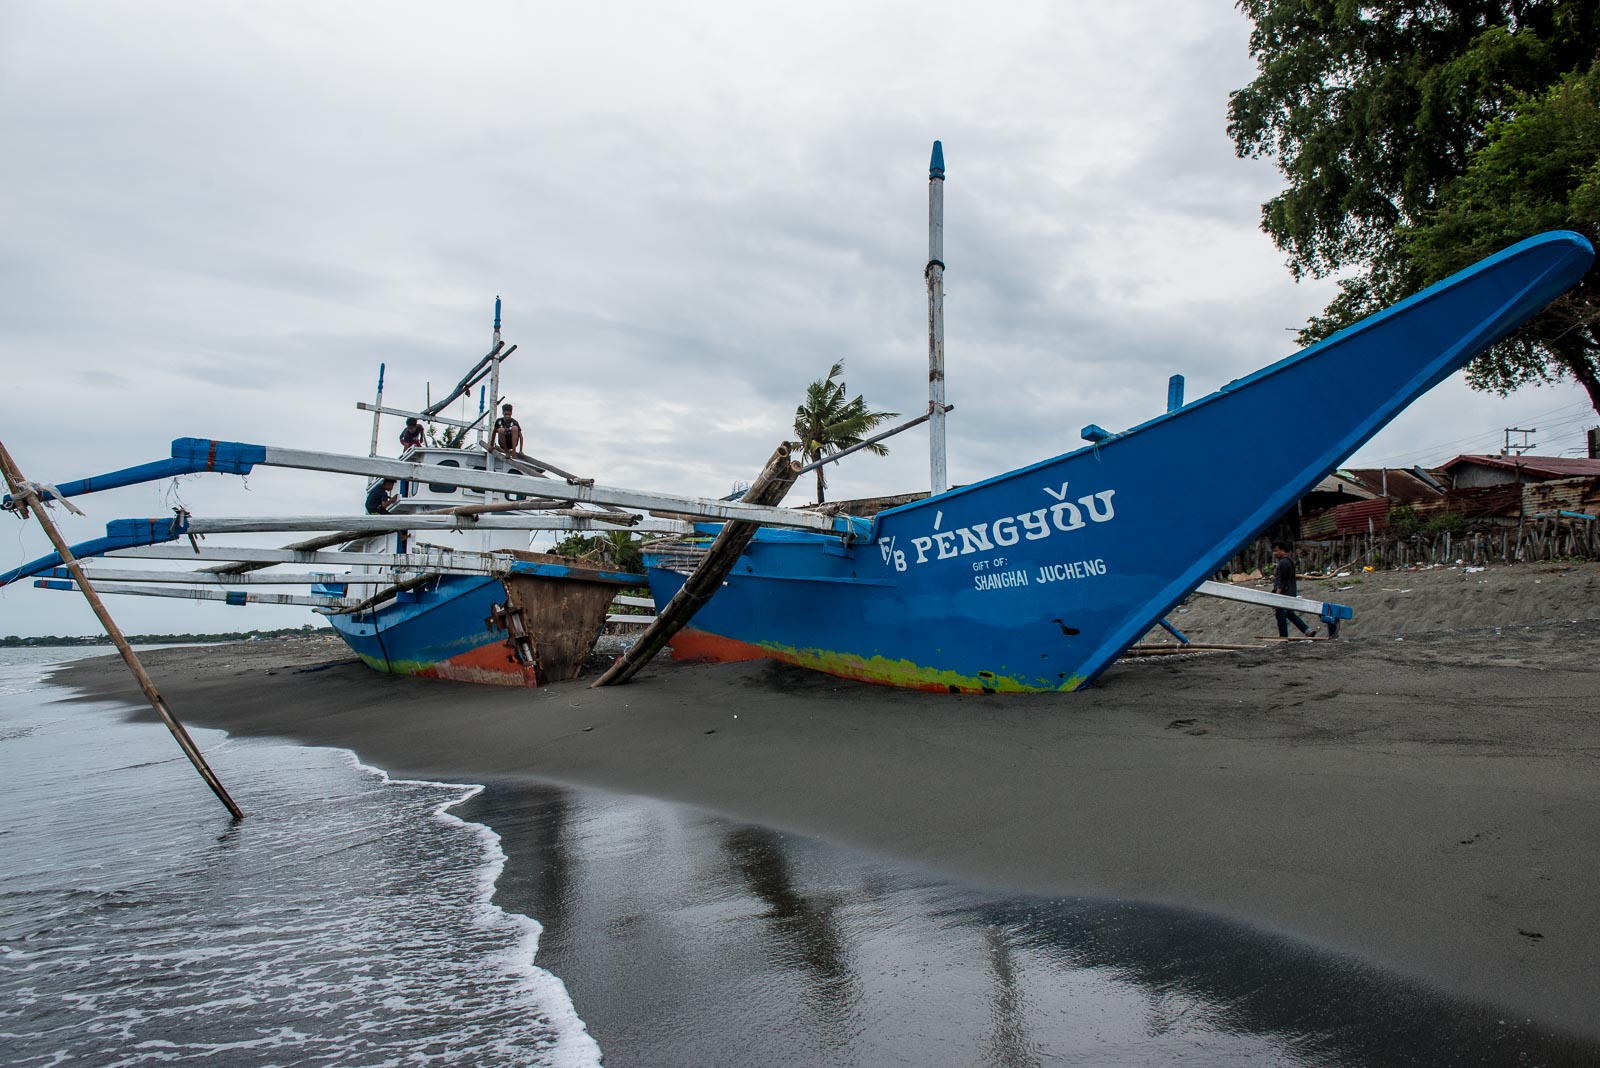 IN RUINS. The F/B Pengyou on the beach of Barangay Pag-asa, San Jose, Occidental Mindoro on November 13, 2019, after strong waves pulled it from its anchorage during the height of Typhoon Quiel. All photos by LeAnne Jazul/Rappler    